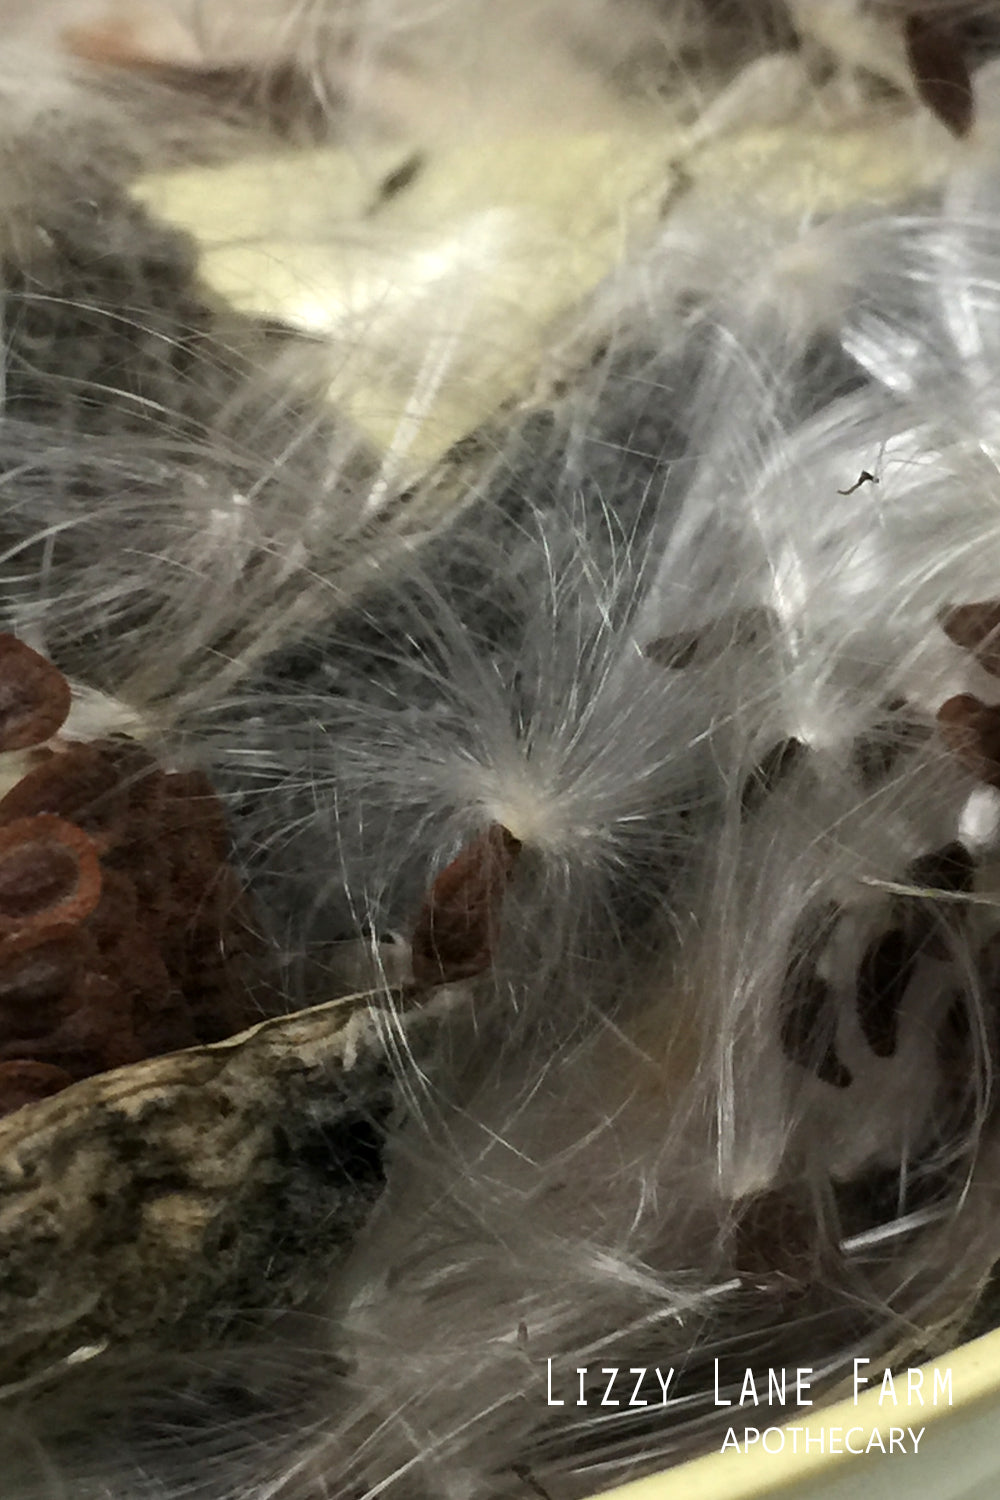 milkweed fluff- a wish is granted for each seed caught and released again...